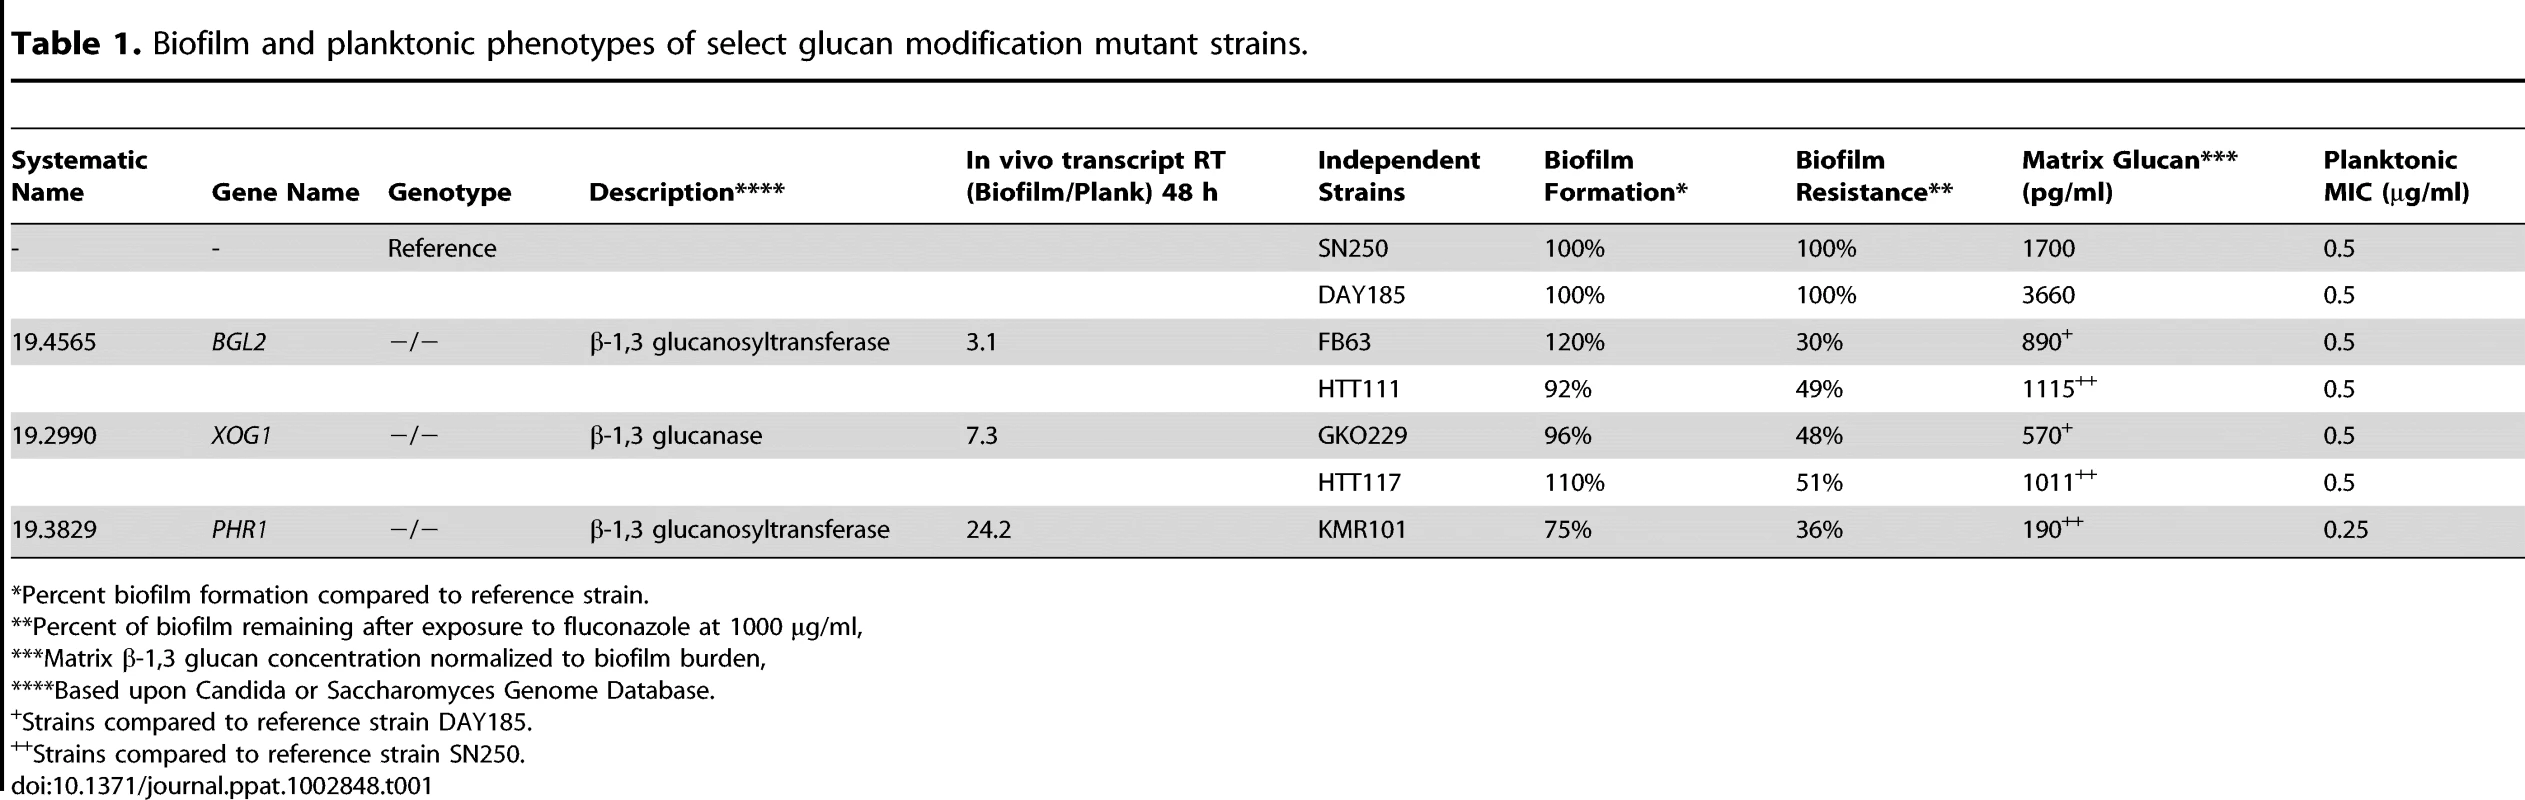 Biofilm and planktonic phenotypes of select glucan modification mutant strains.